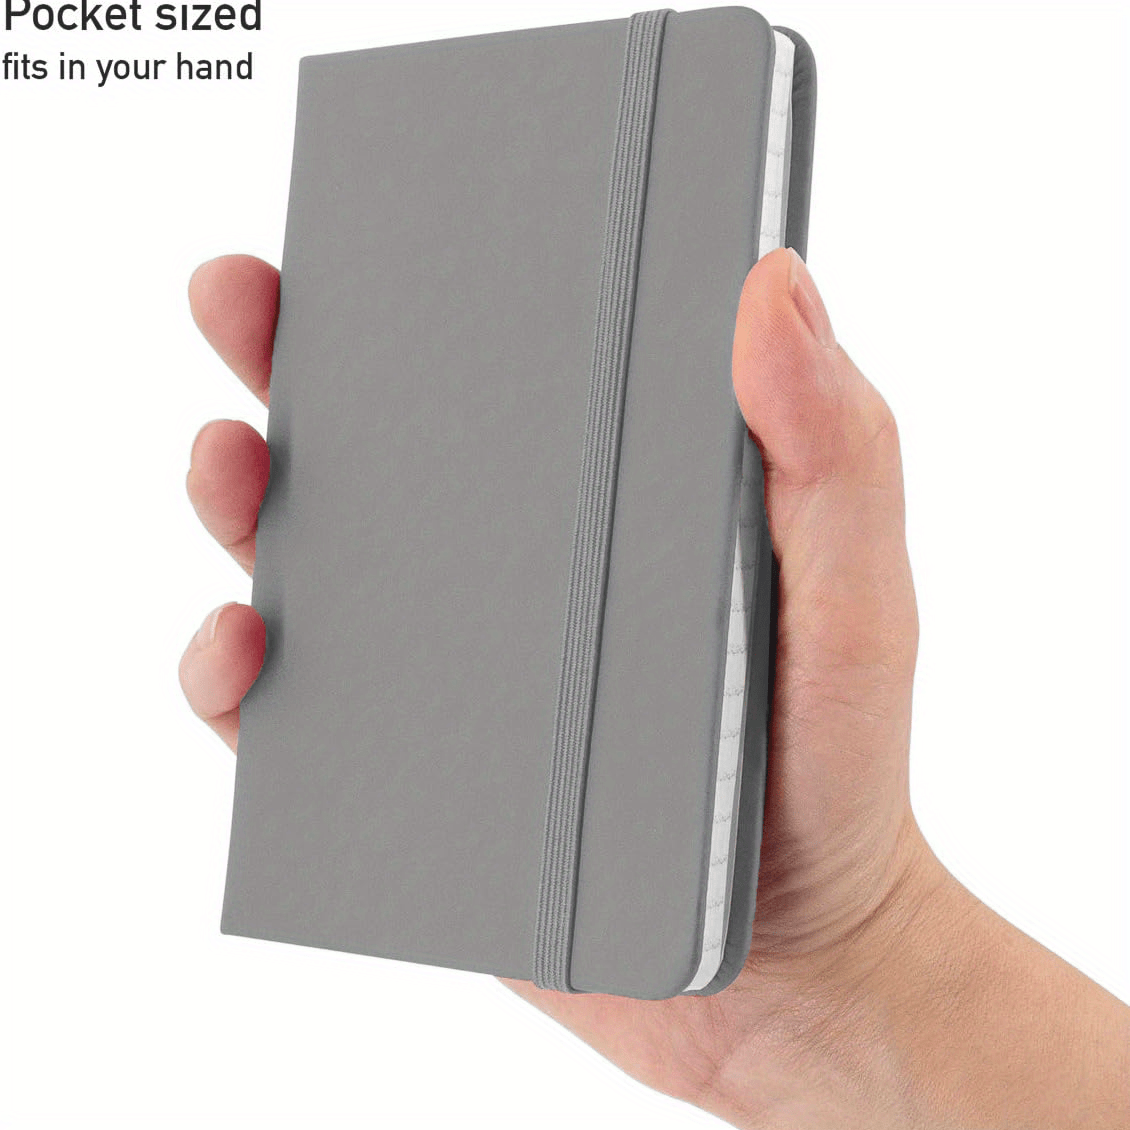  5 x 5 Square Handy Pocket Hardcover PU Leather